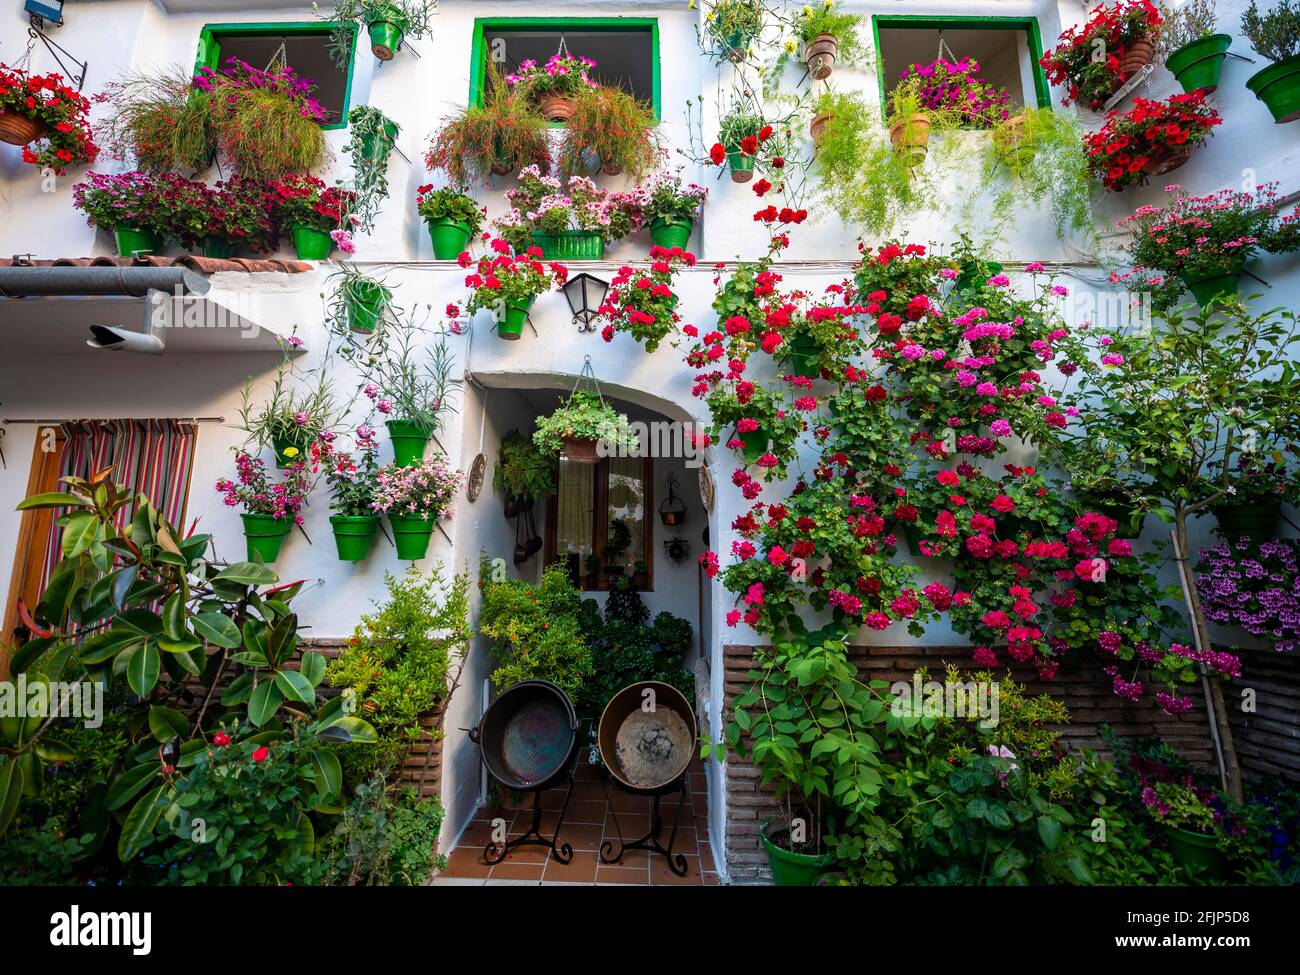 Patio decorated with flowers, geraniums in flower pots on the wall of the house with windows, Fiesta de los Patios, Cordoba, Andalusia, Spain Stock Photo